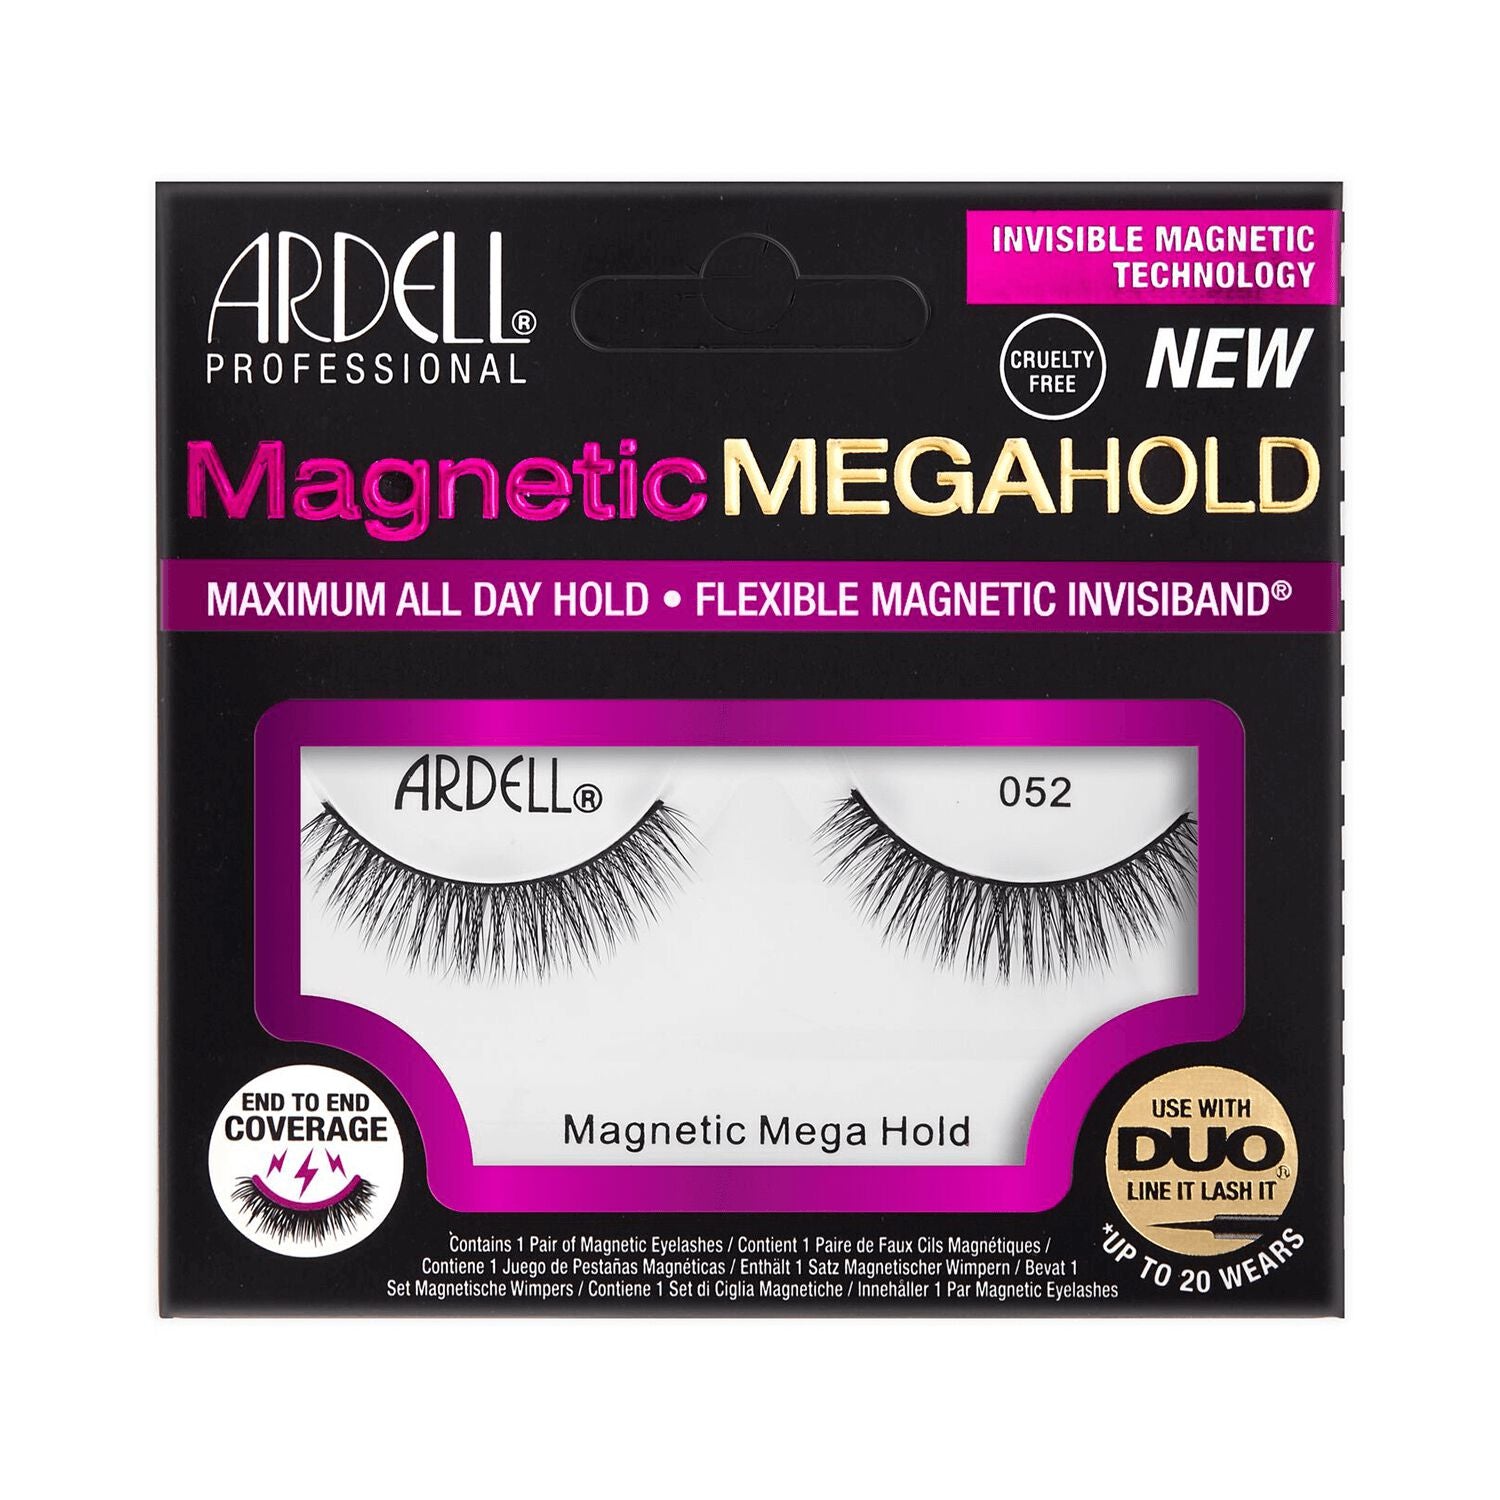 Magnetic Lashes  by   Ardell Magnetic Megahold Lashes #052